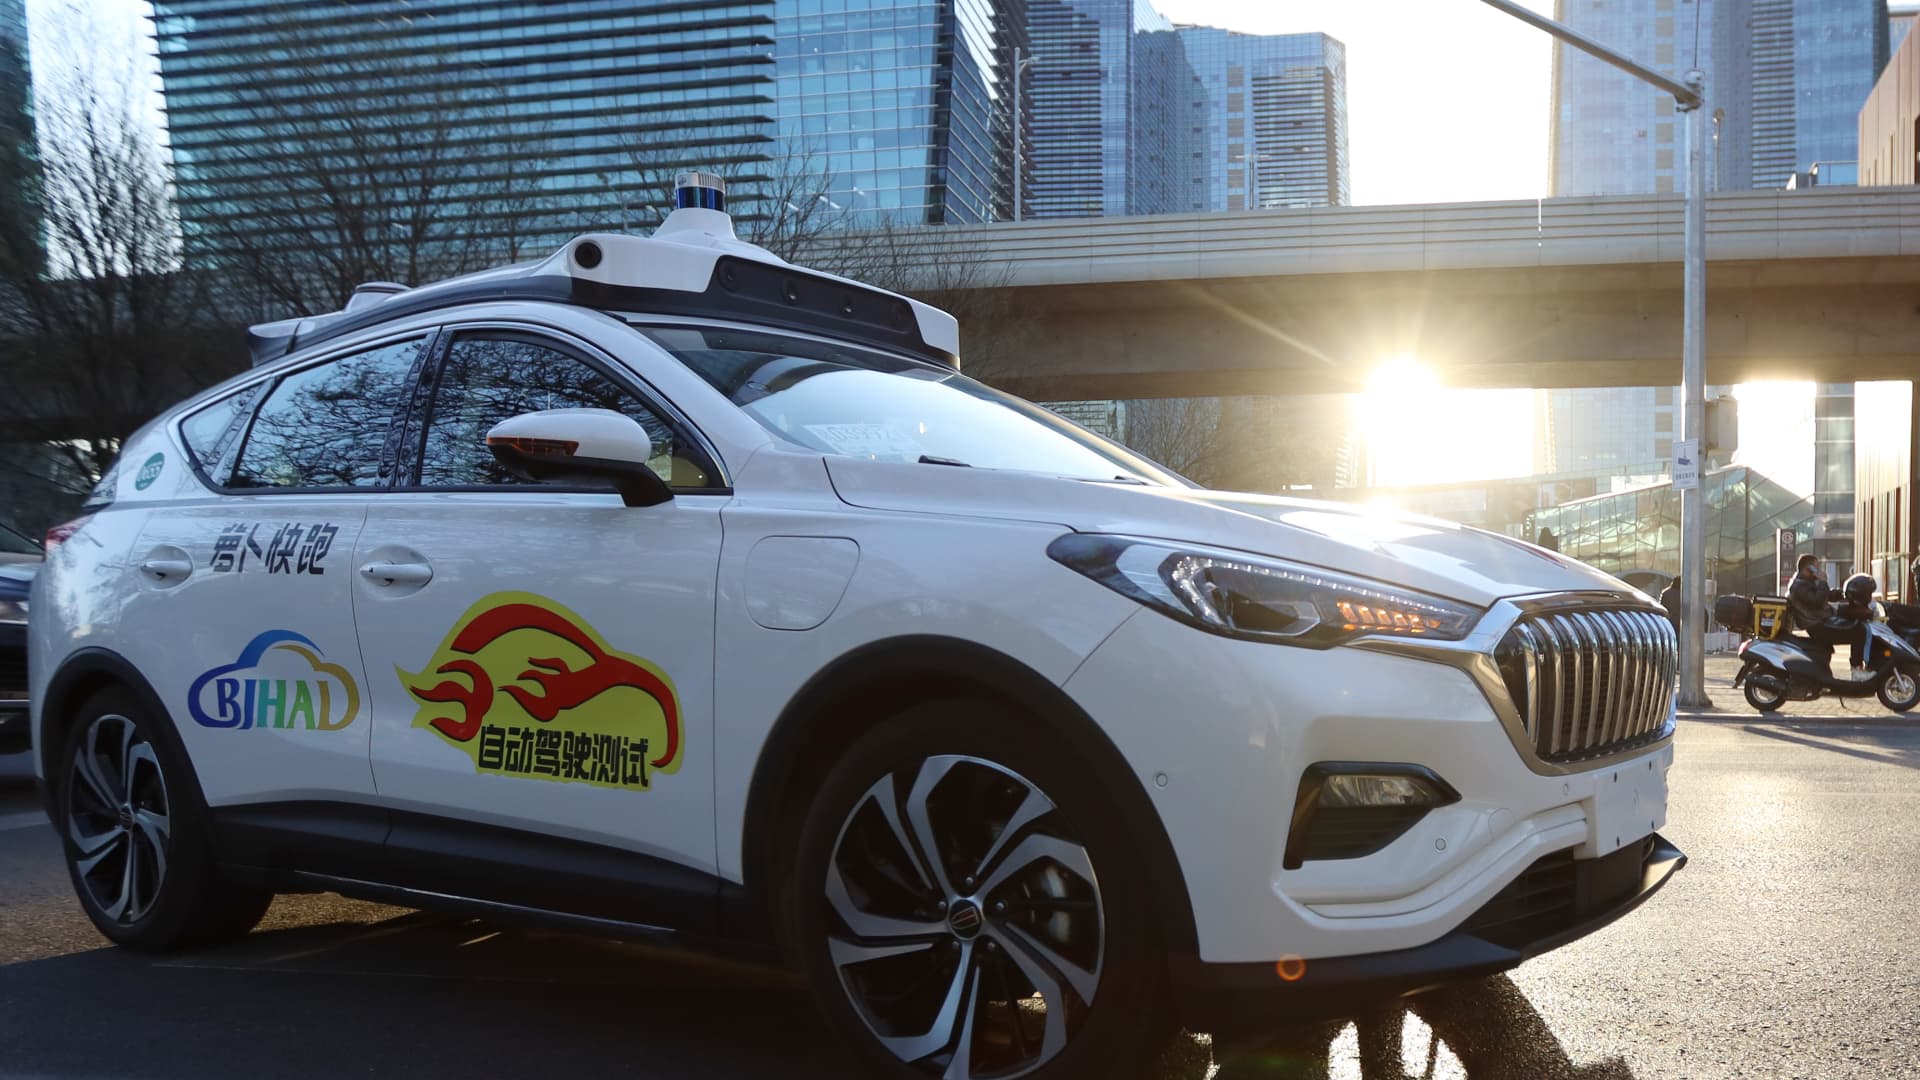 Baidu claims its robotaxis have grabbed 10% of a ride-hailing market